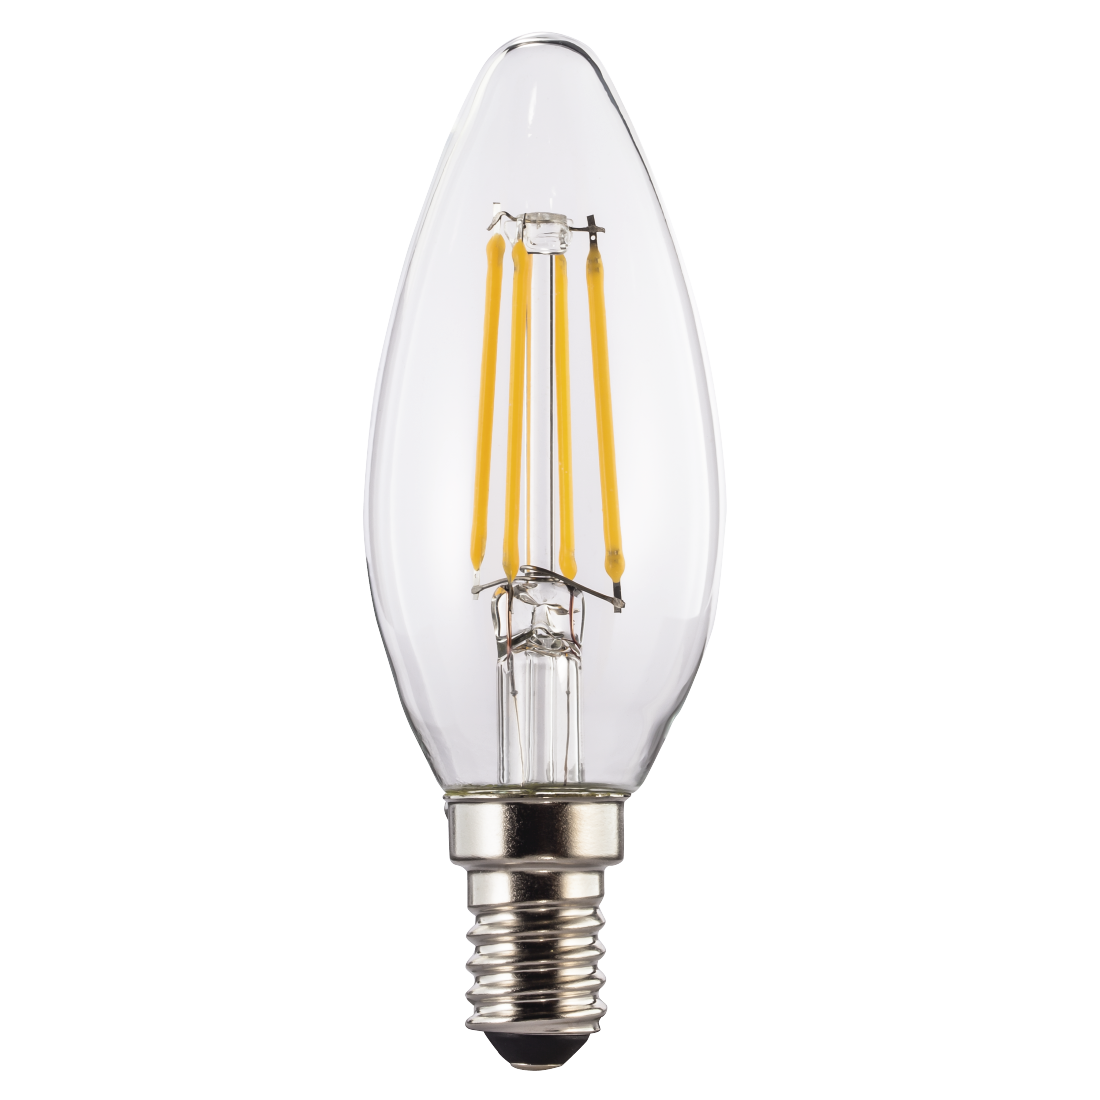 abx High-Res Image - Xavax, LED Filament, E14, 470 lm Replaces 40 W, Candle Bulb, warm white, clear